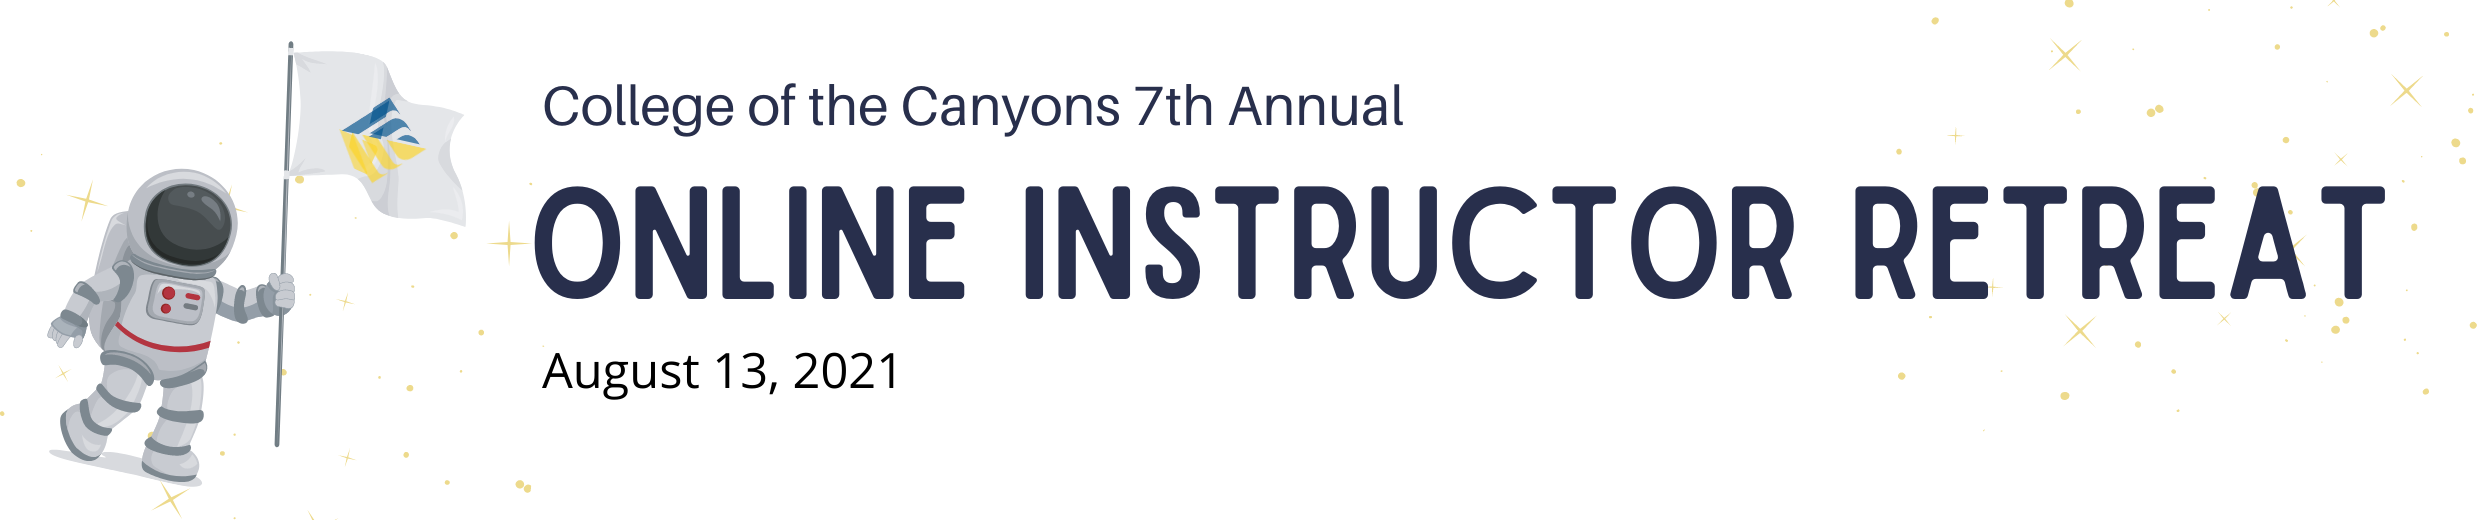 College of the Canyons 7th annual online instructor retreat august 13, 2021